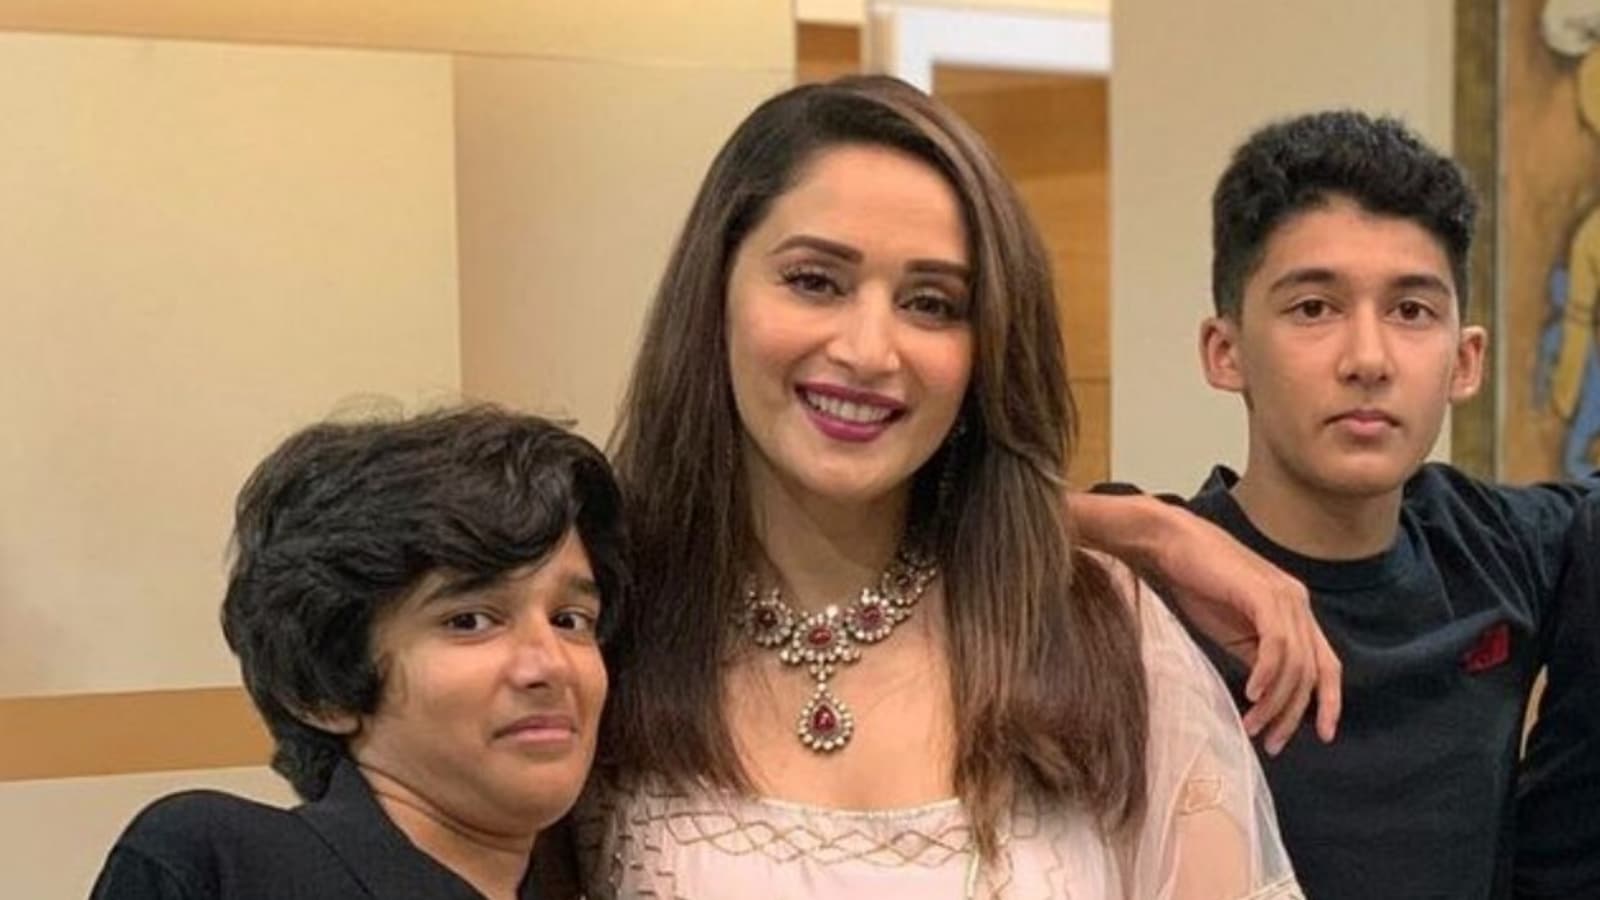 Madhuri Dixitxxxvideo - Madhuri Dixit recalls when her son's friend said: 'You're lucky she is your  mom' | Bollywood - Hindustan Times